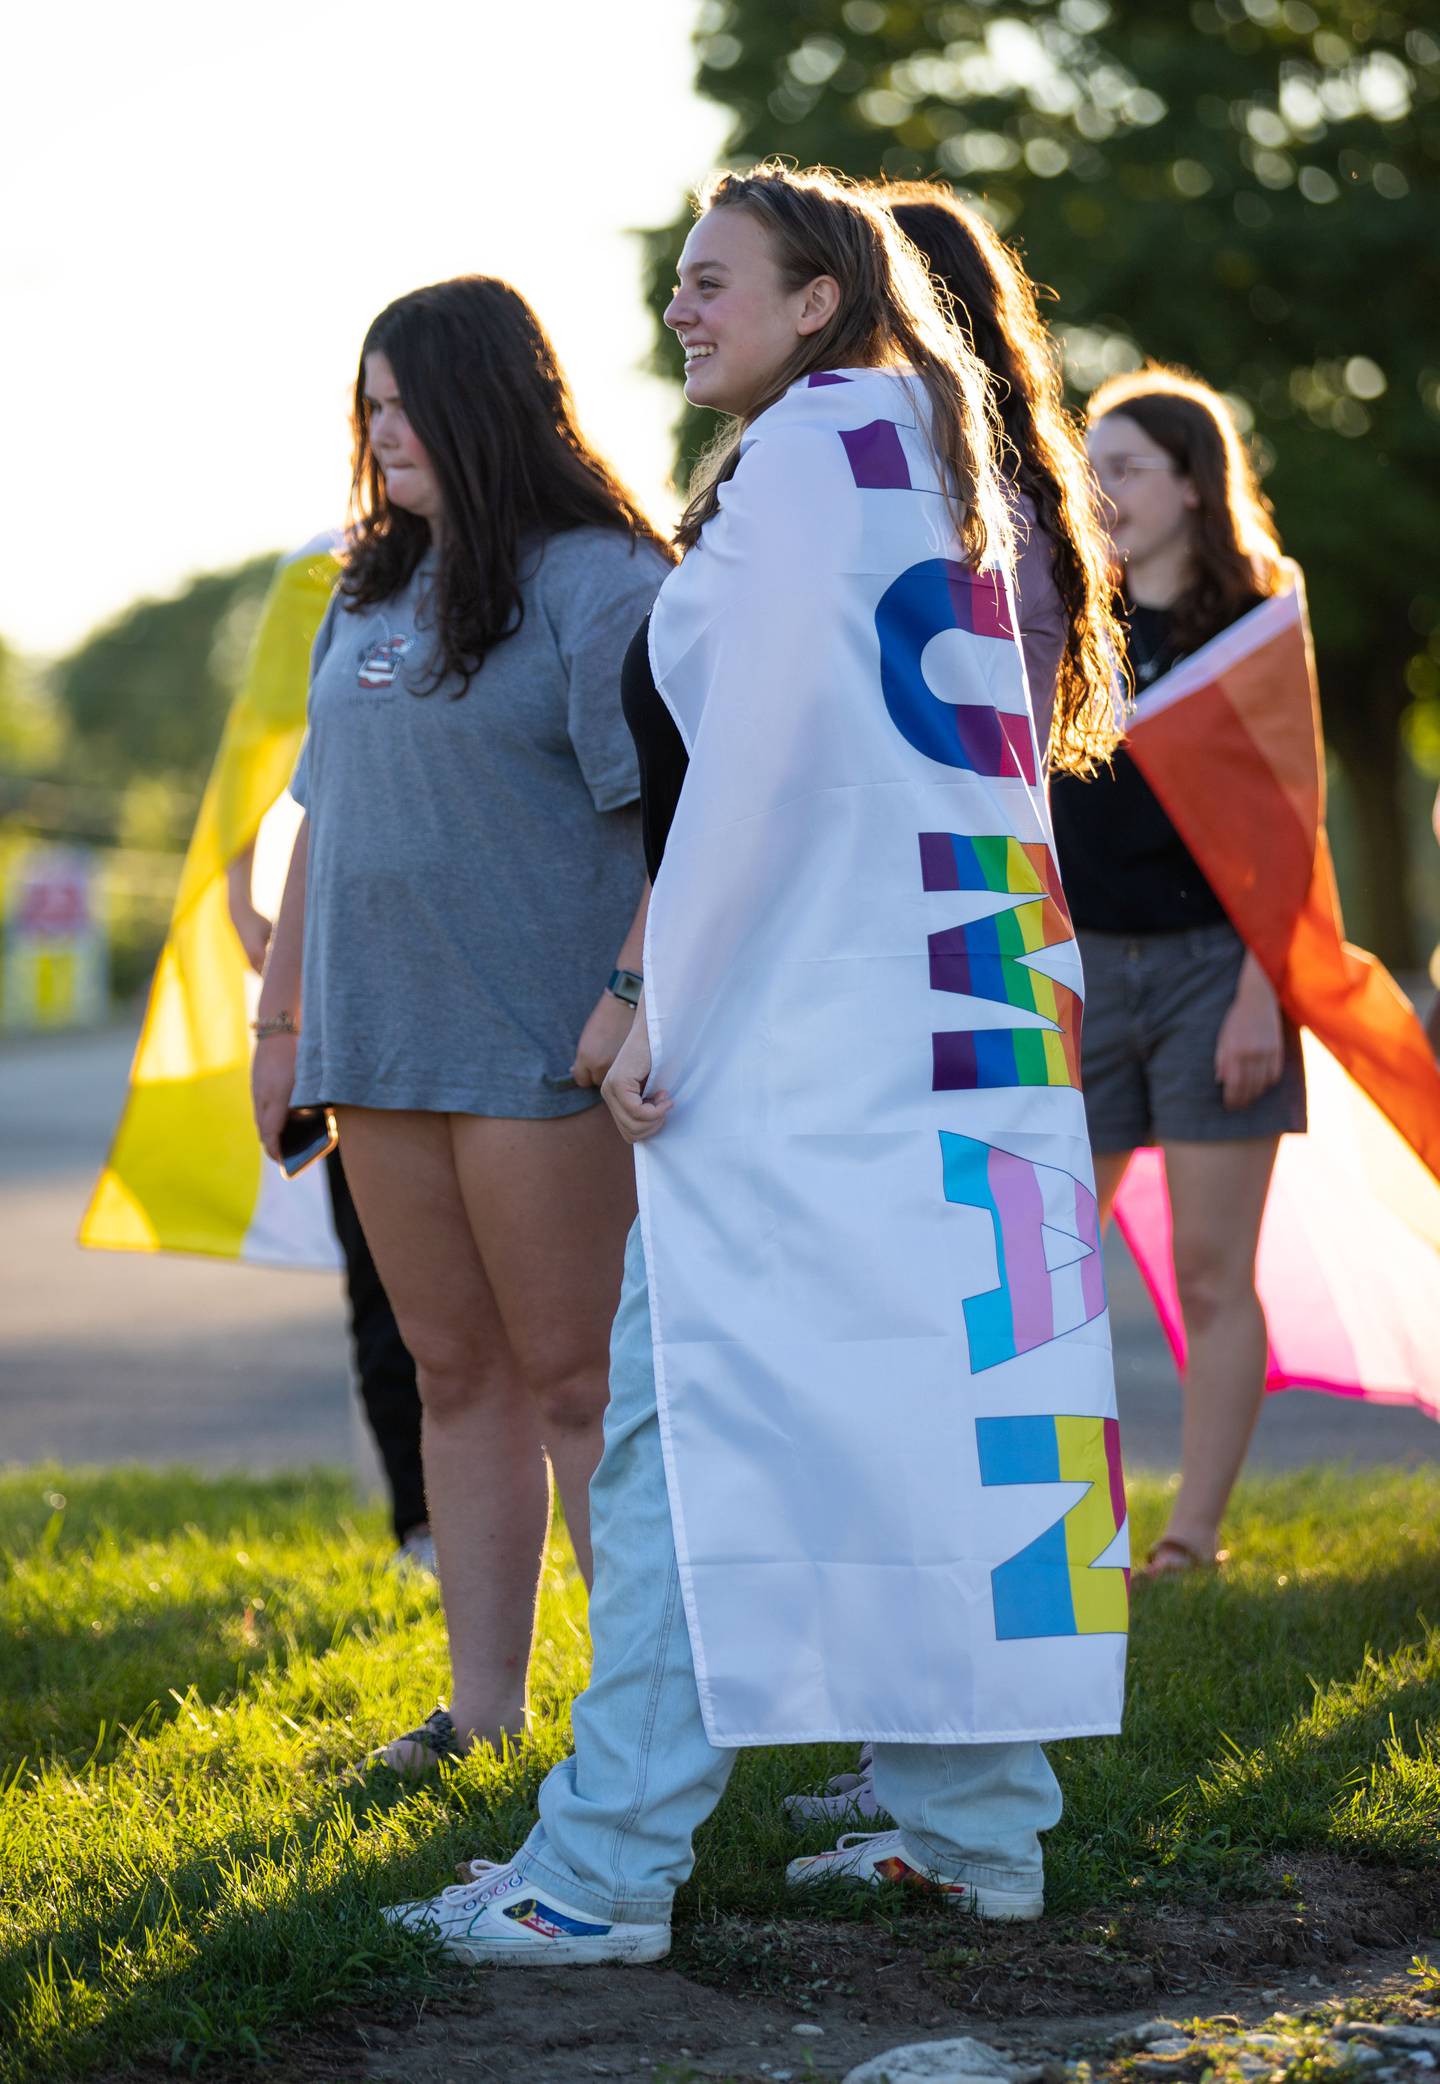 Jessica Swanson, 17, of Geneva wears a flag that says the word "human" during the Pride Fire Hydrant Rally at the northwest corner of Kirk Road and State Street/Rte. 38 in Geneva on Tuesday, Aug. 9, 2022.